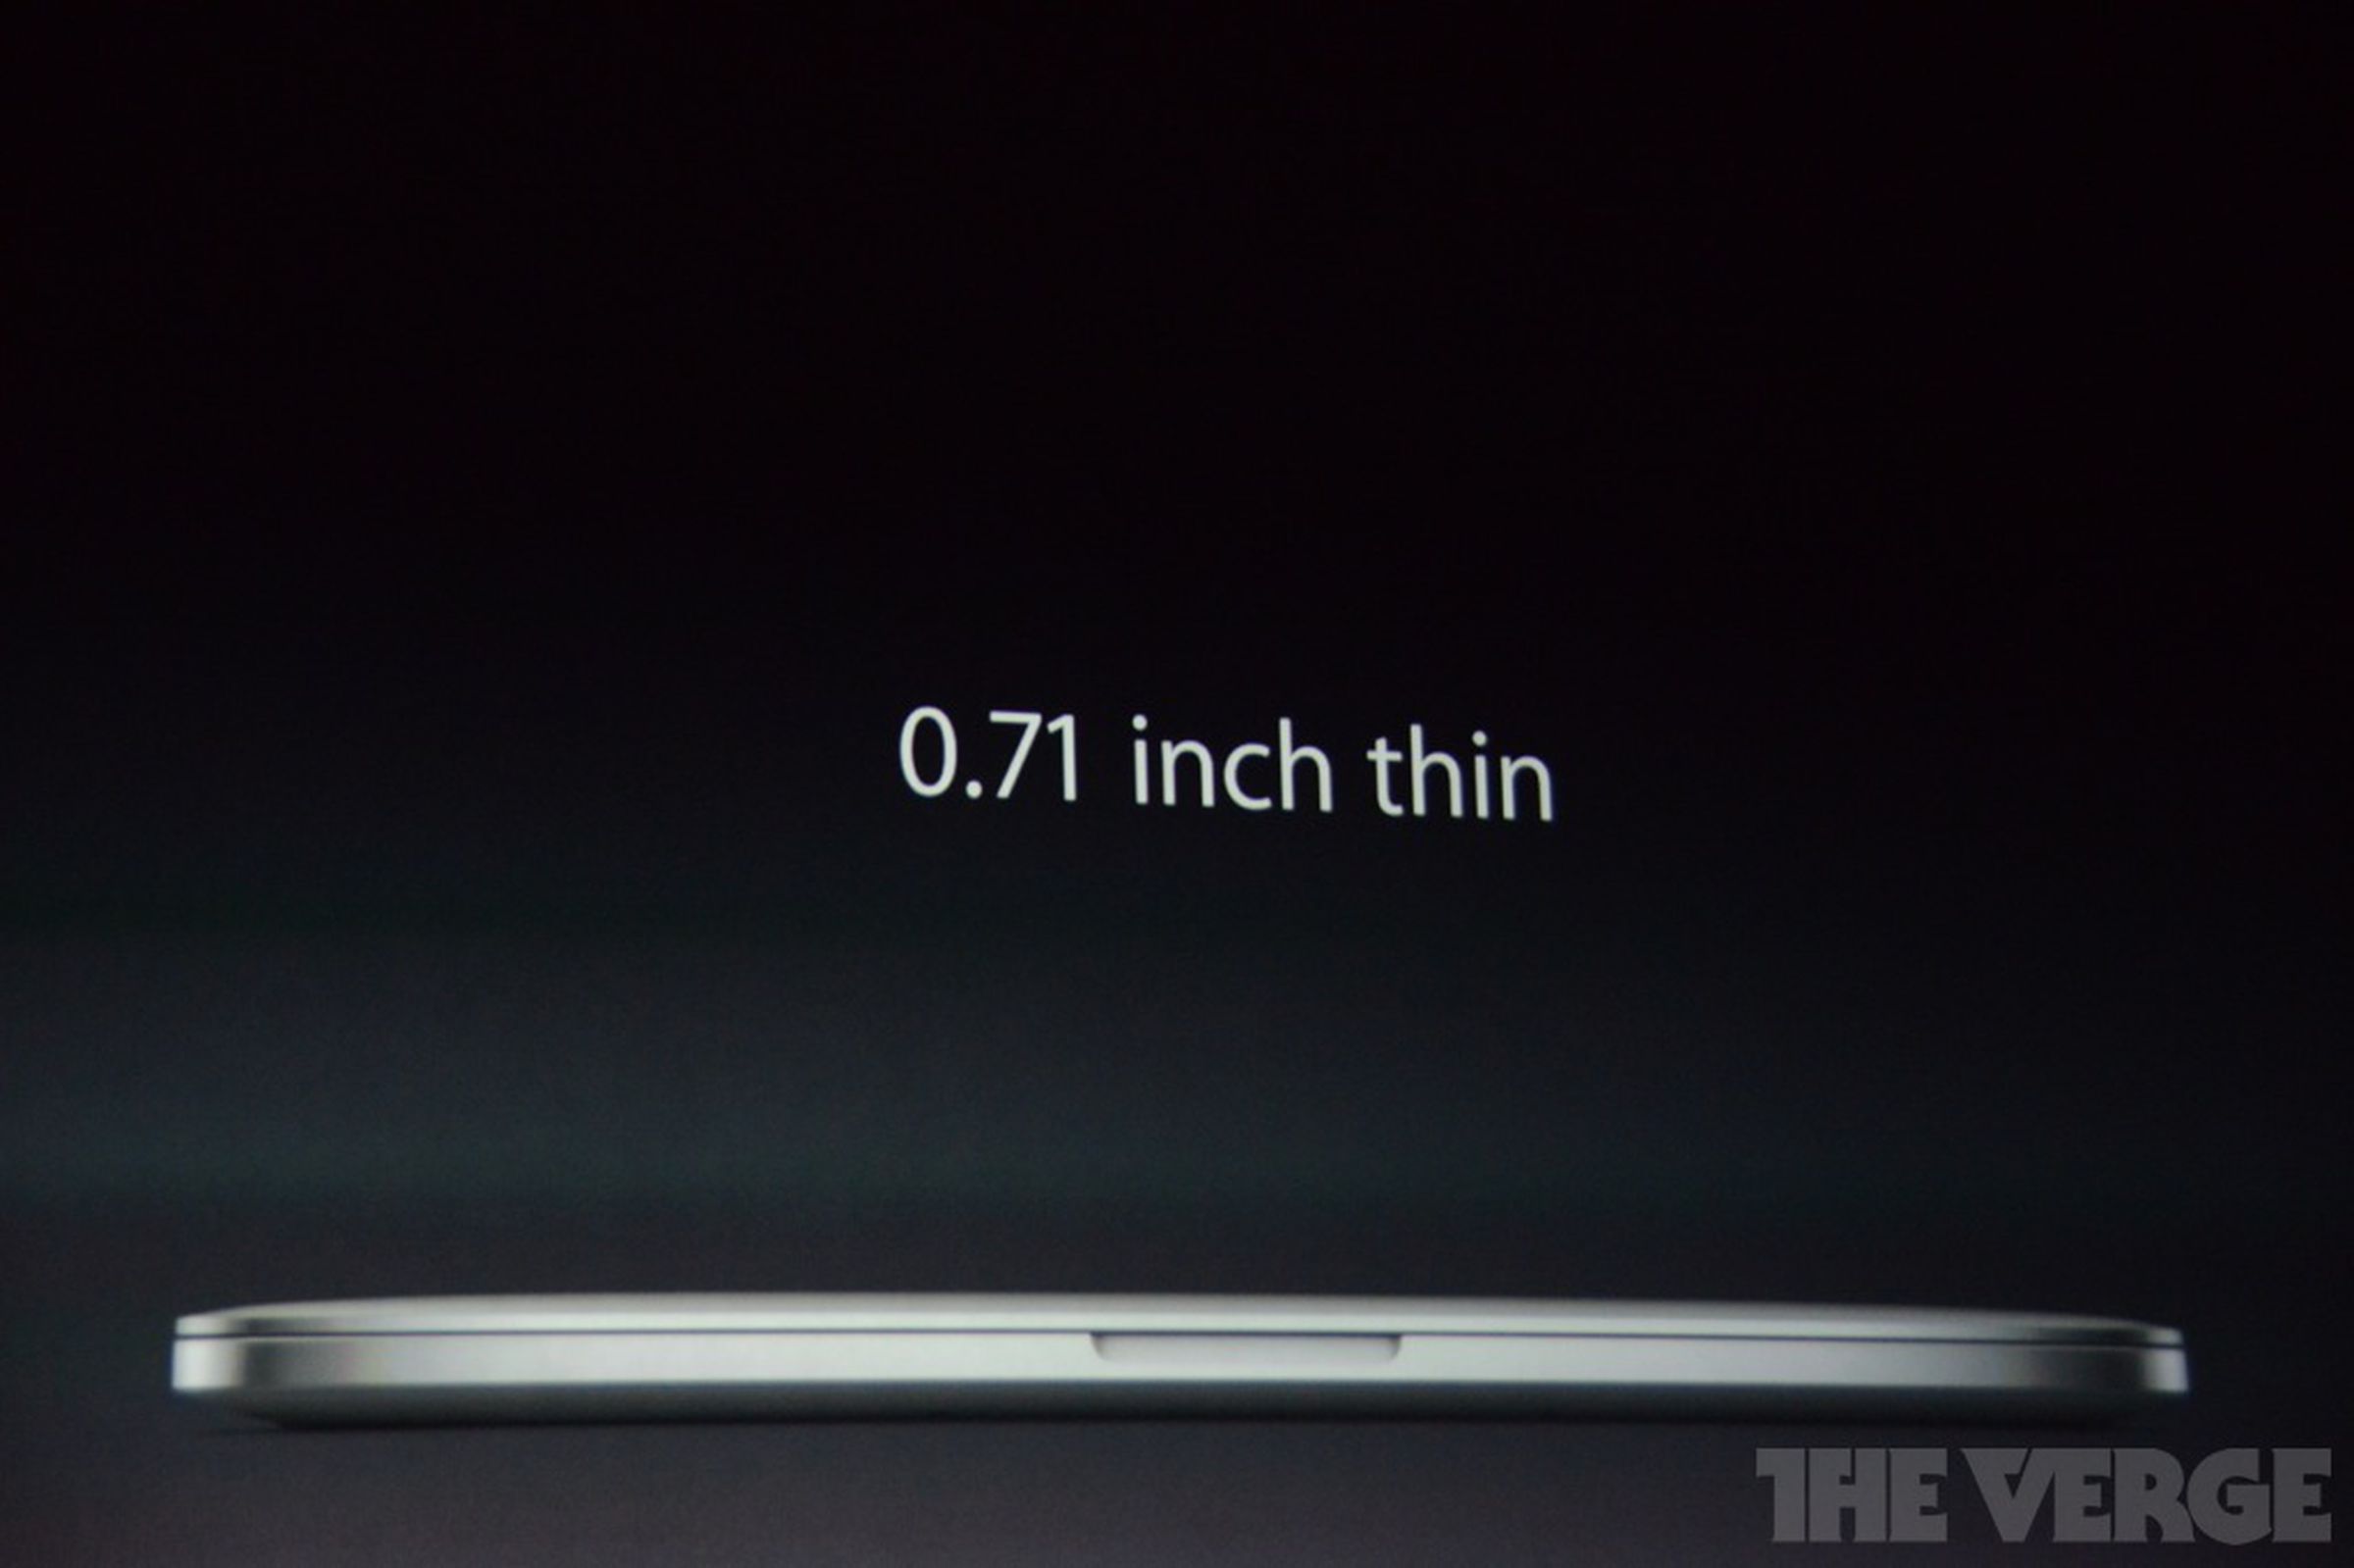 Photos of the new MacBook Pros with Retina Displays from Apple's fall 2013 event